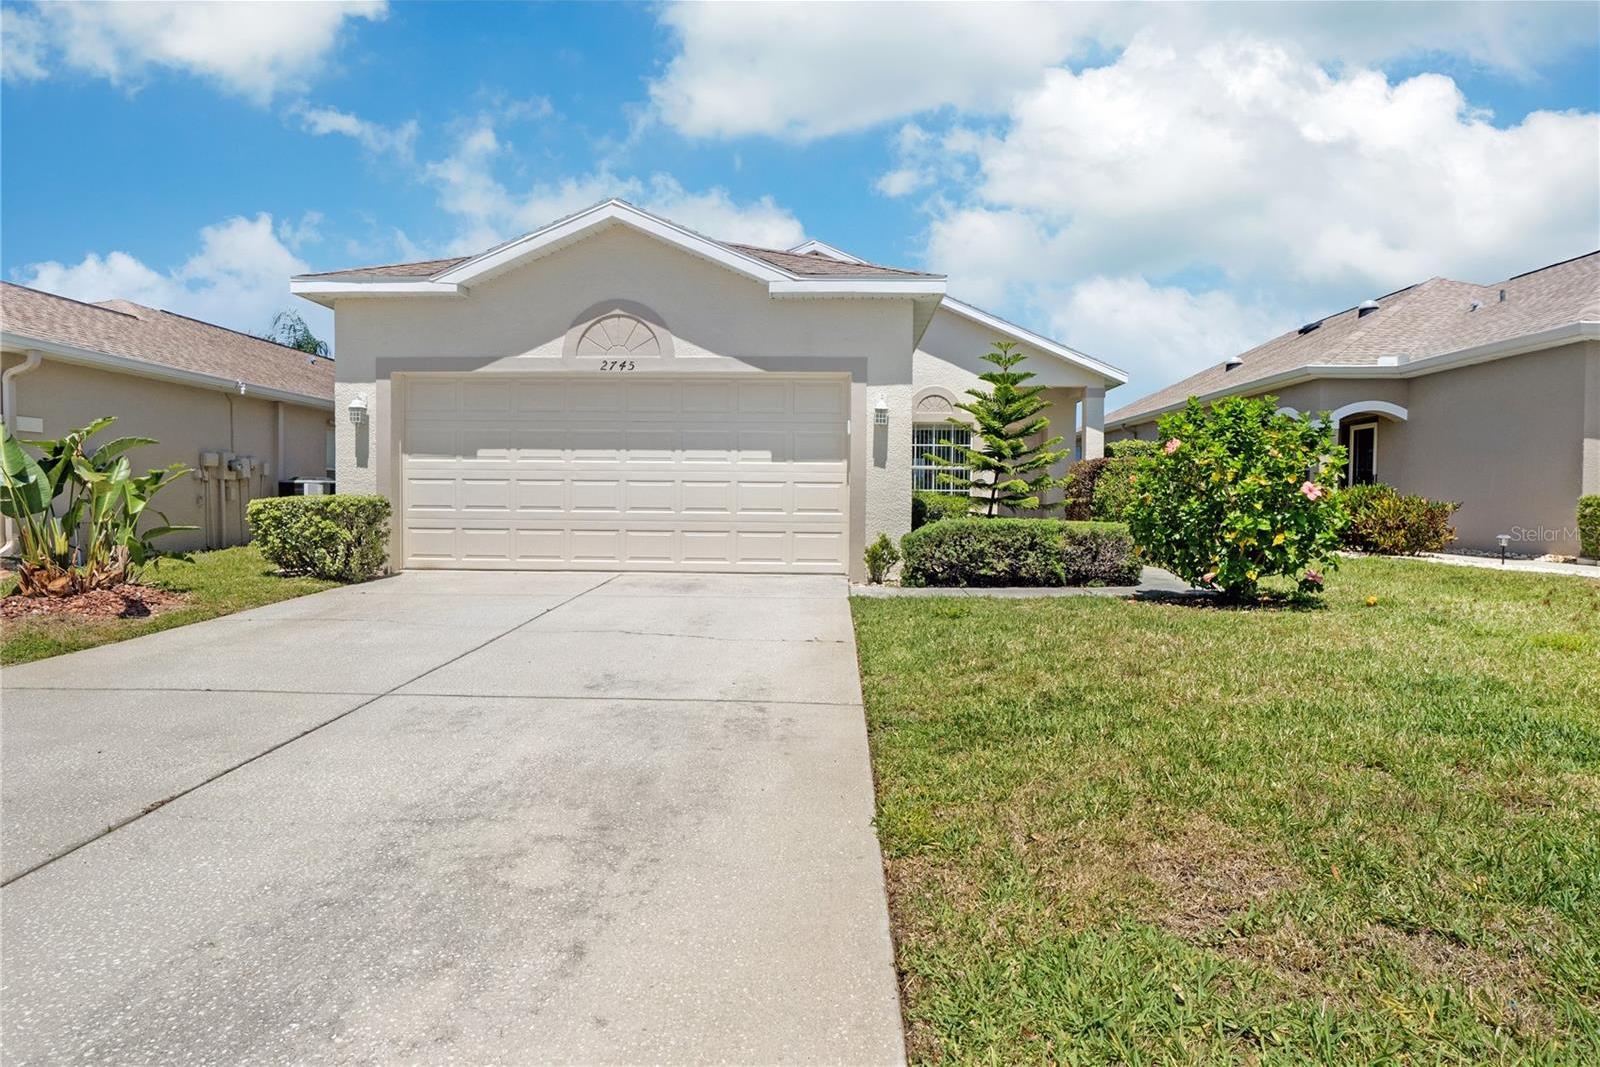 Photo one of 2745 Plantain Dr Holiday FL 34691 | MLS W7863996